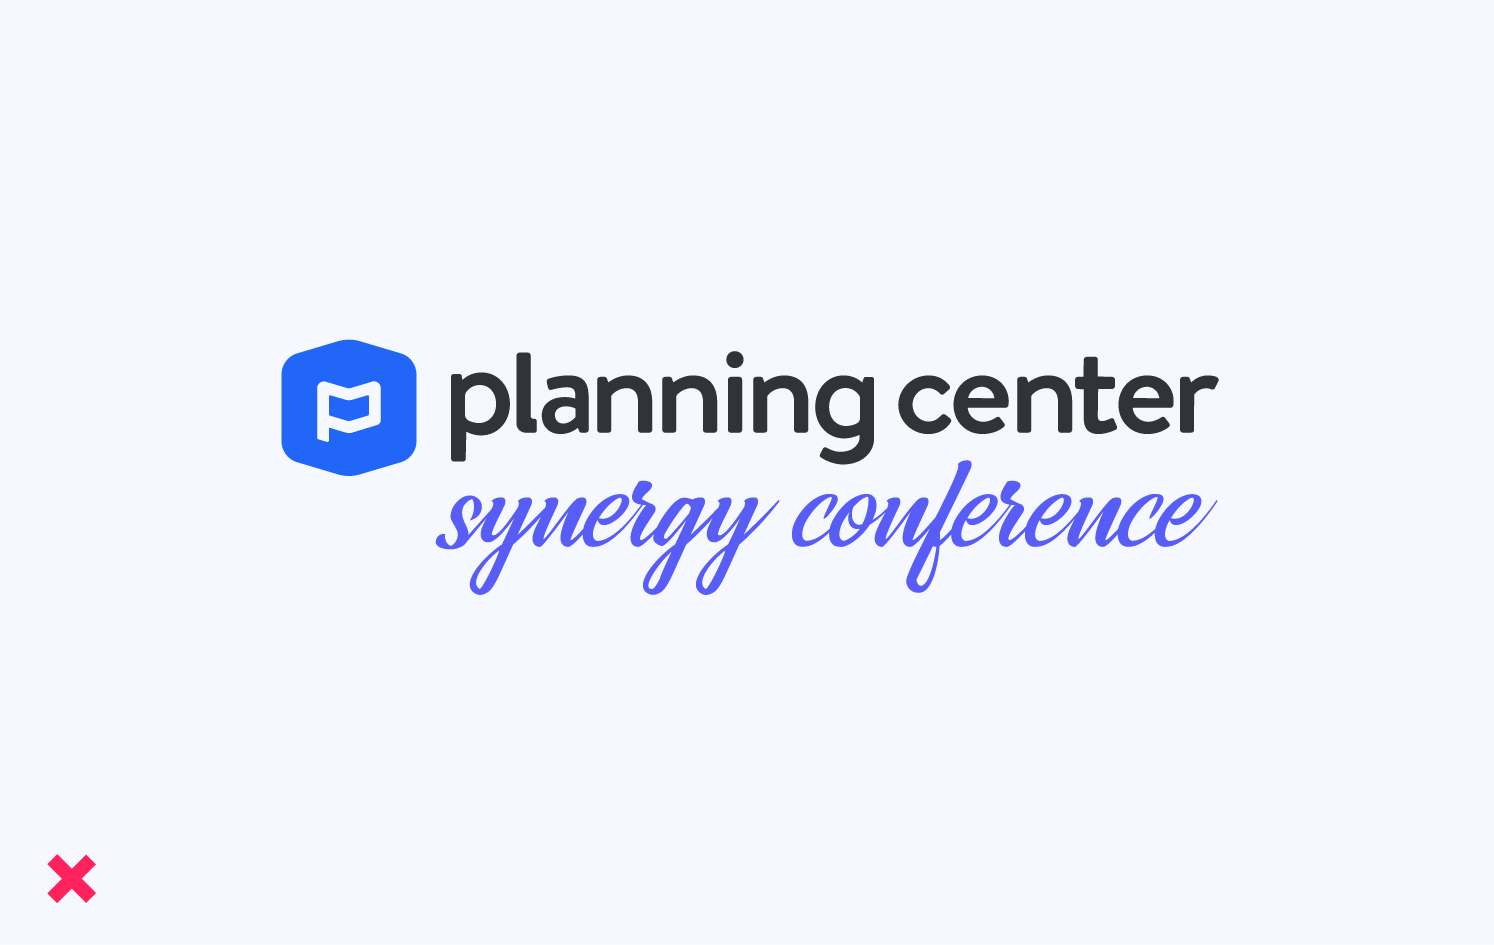 Planning Center Logo combined with other logo